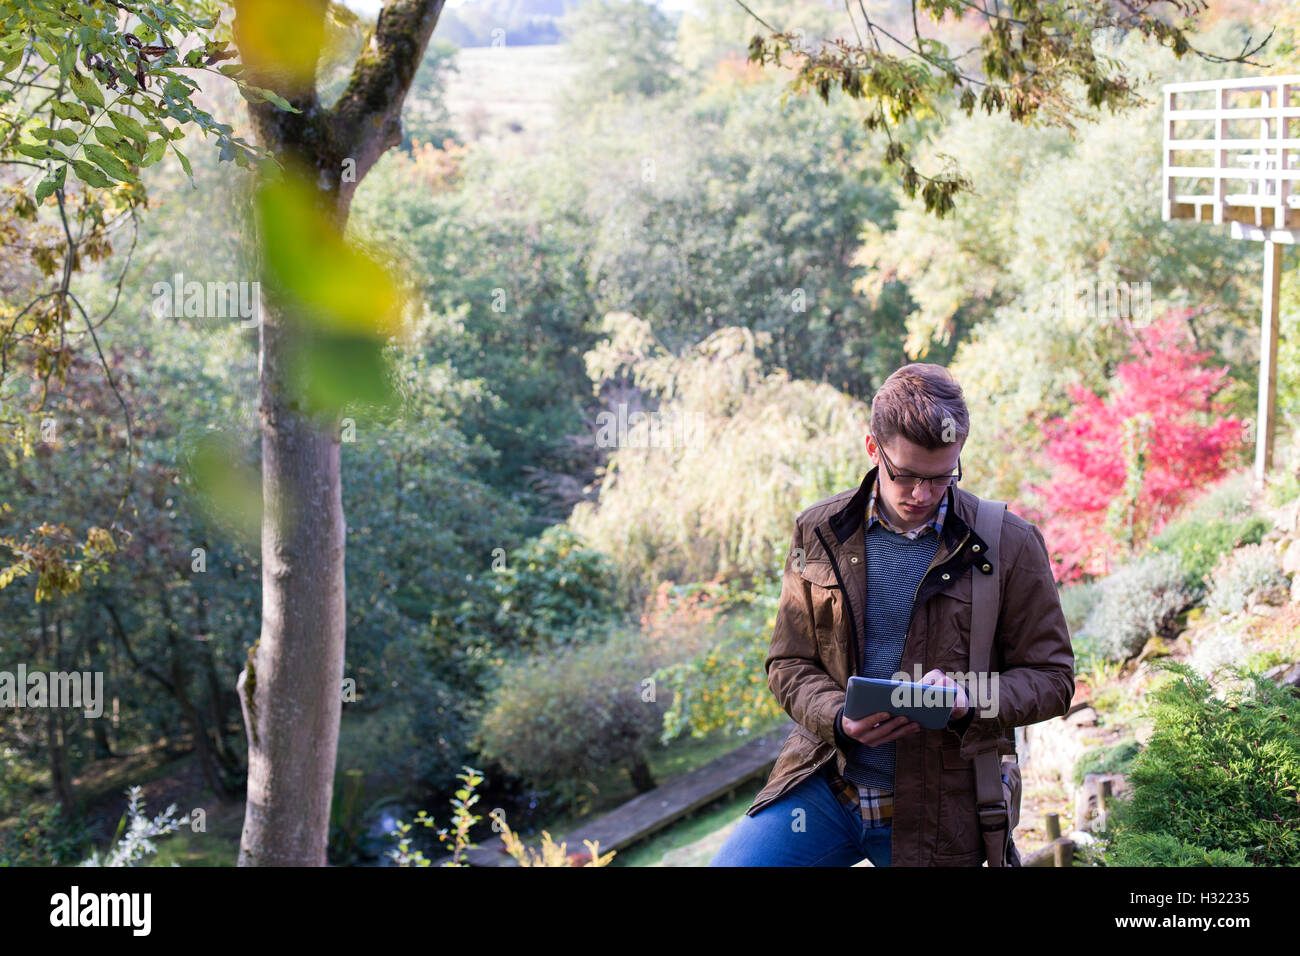 Young man analysing nature. He is using a digital tablet for research. Stock Photo